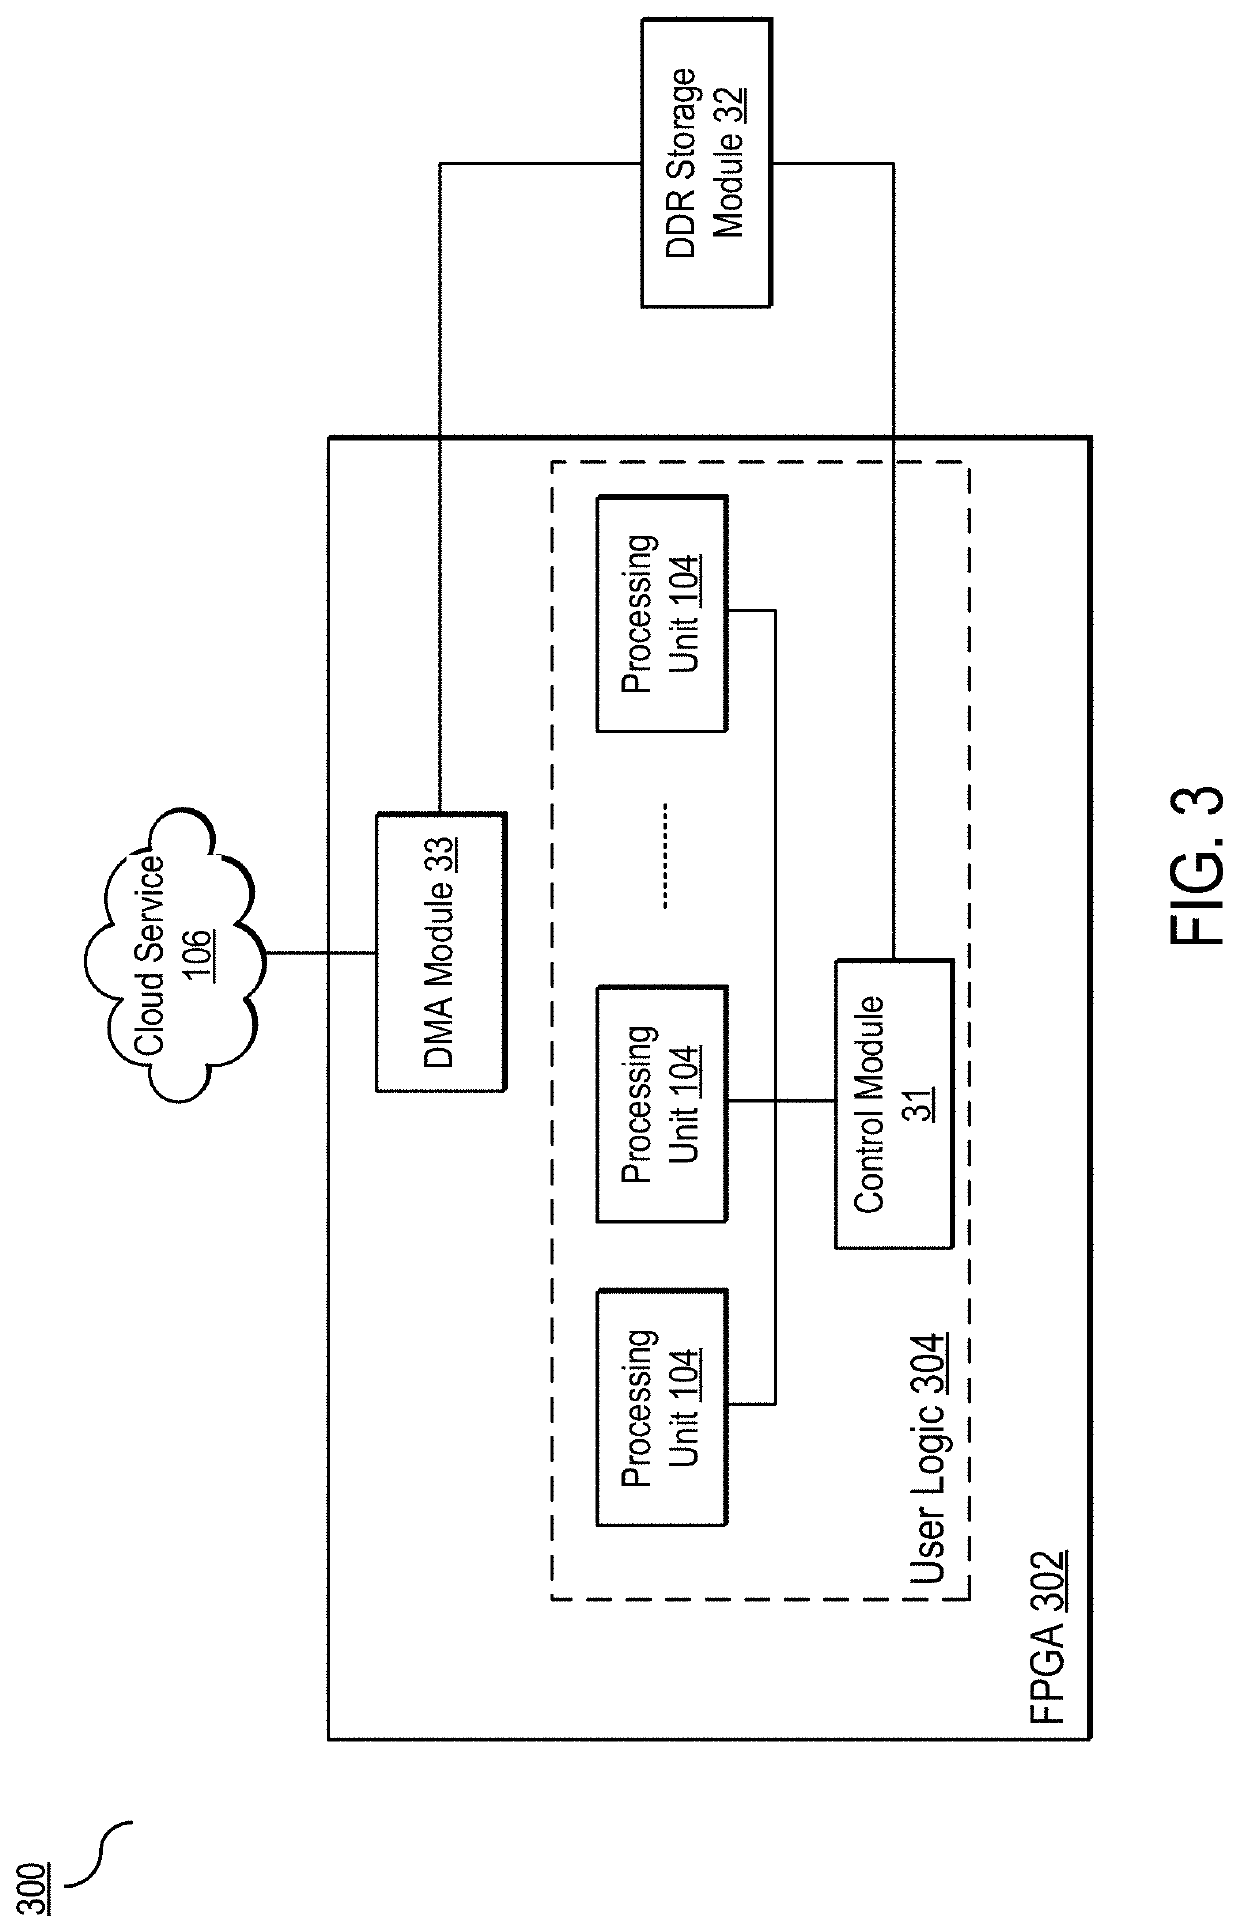 System, method, and electronic device for cloud-based configuration of FPGA configuration data